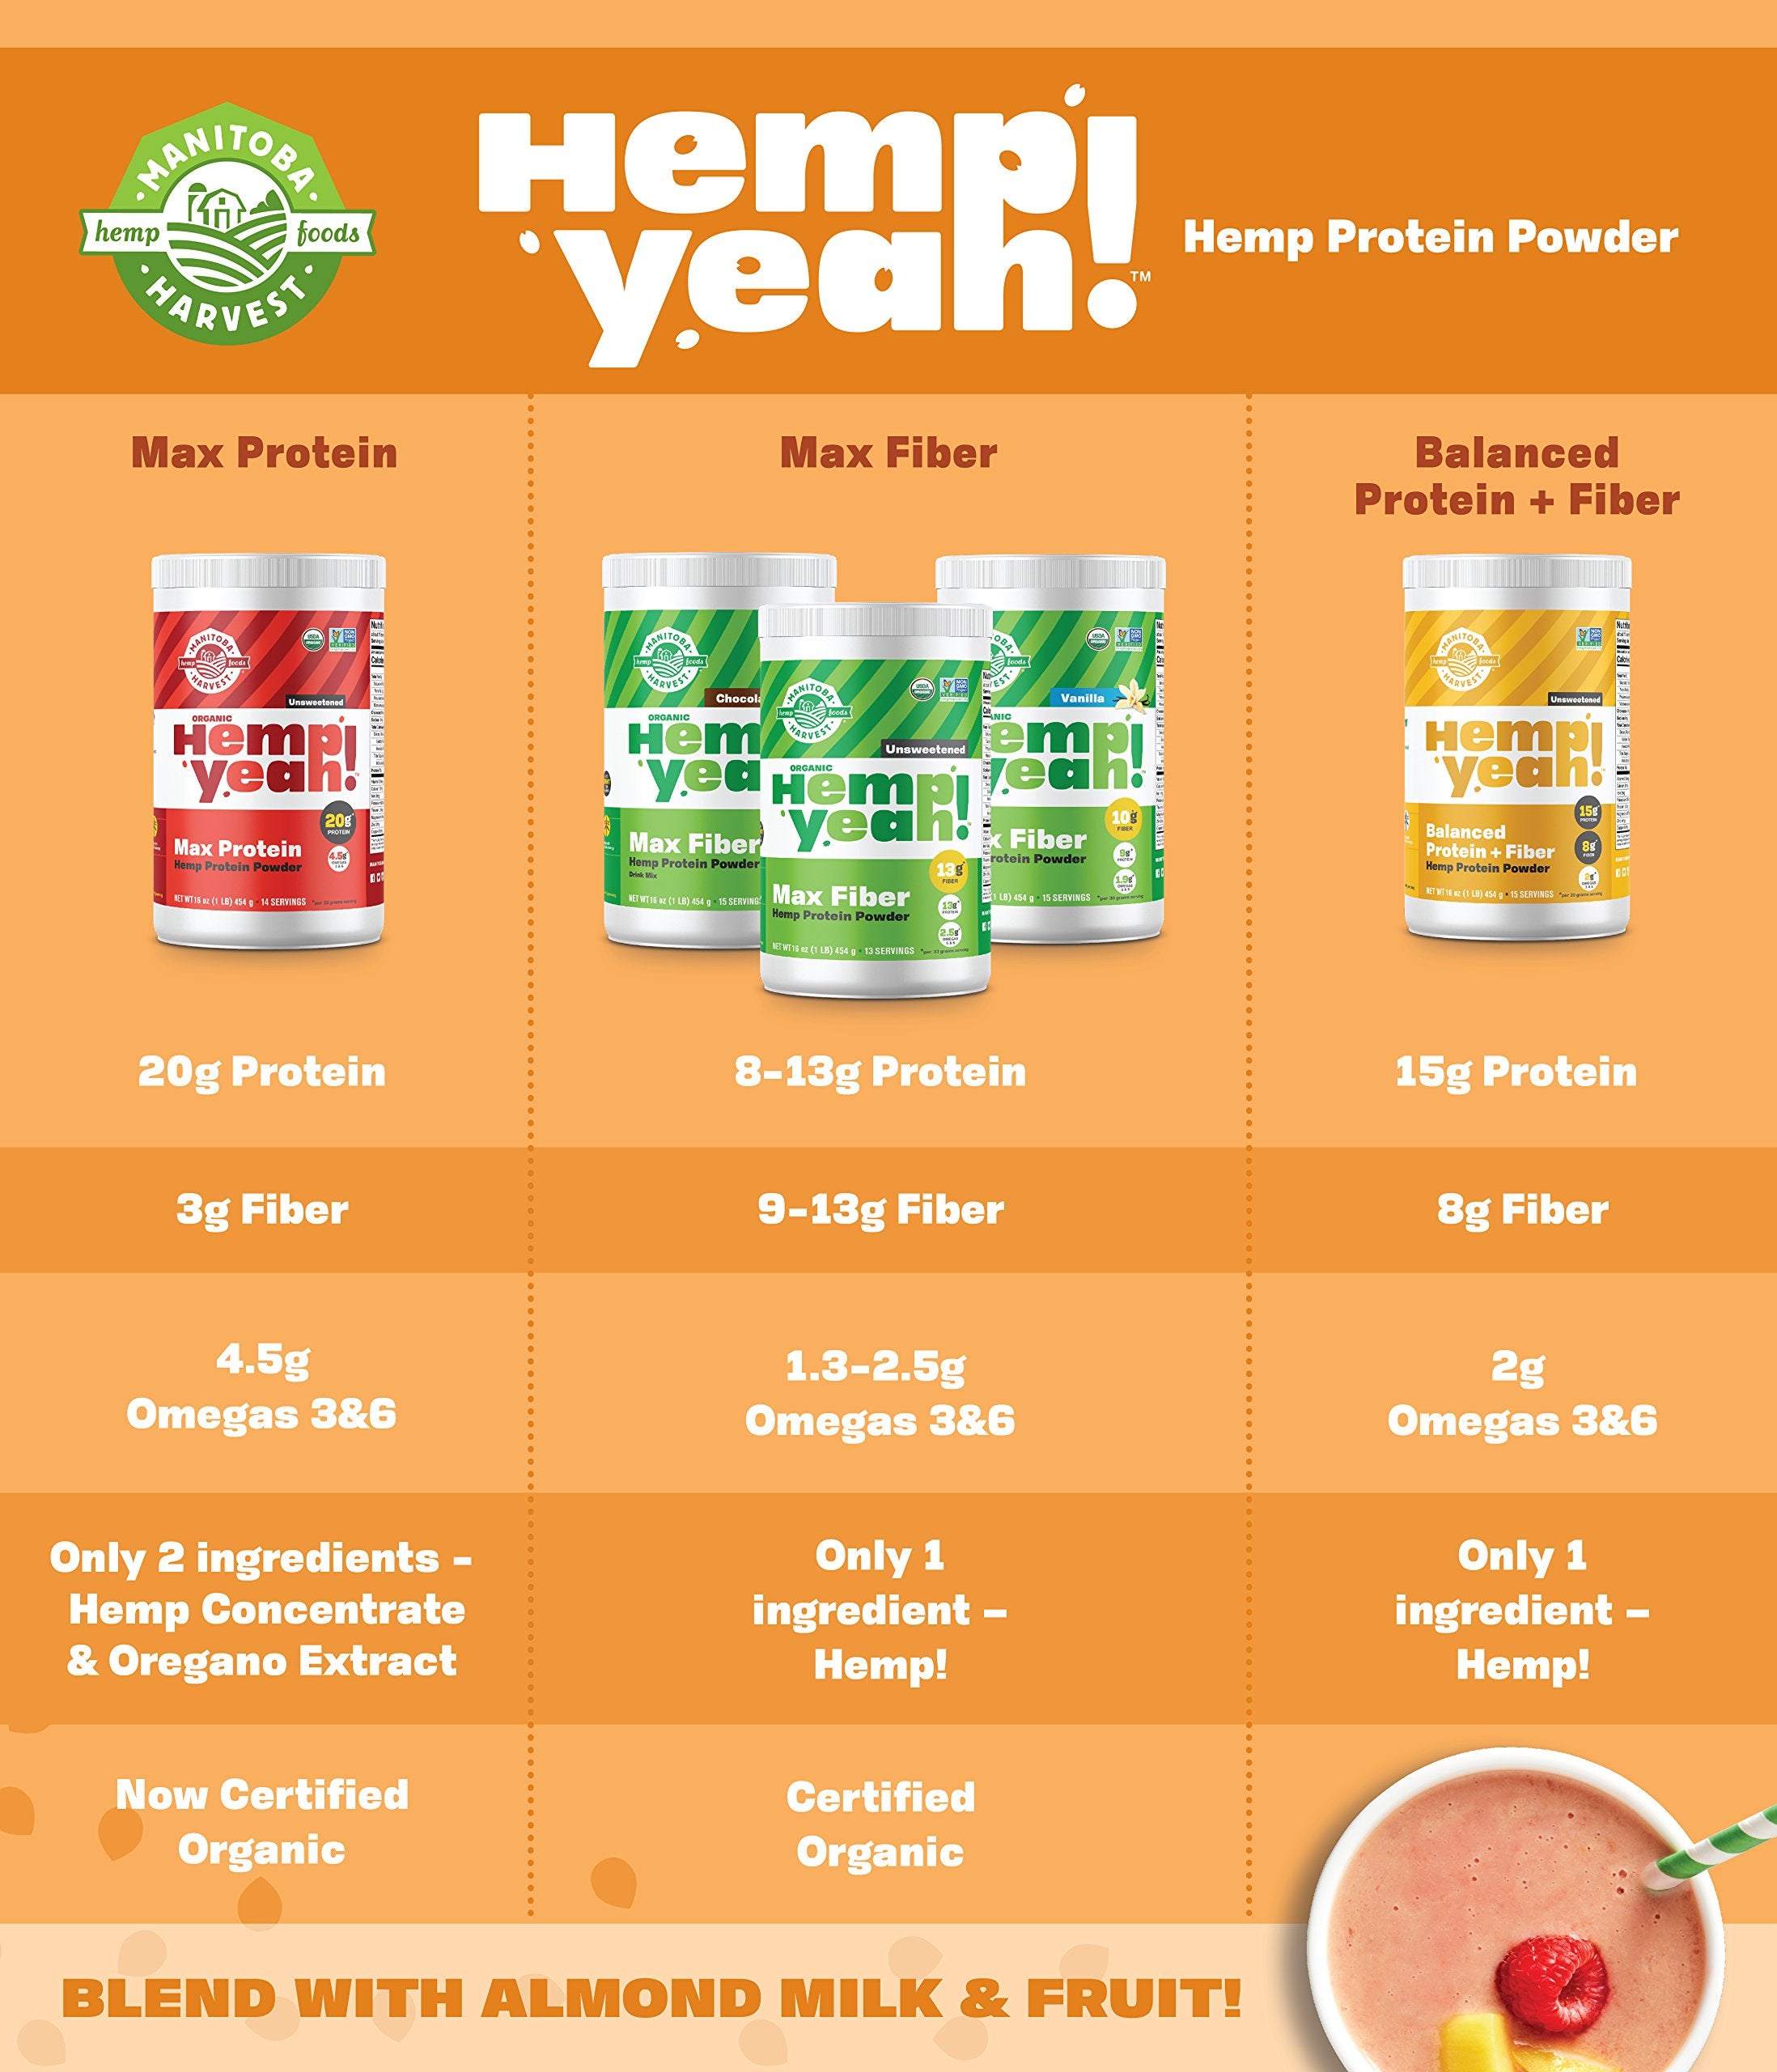 Manitoba Harvest Hemp Yeah! Organic Max Protein Powder, Unsweetened, 16oz; with 20g protein and 4.5g Omegas 3&6 per Serving, Keto-Friendly, Preservative Free, Non-GMO